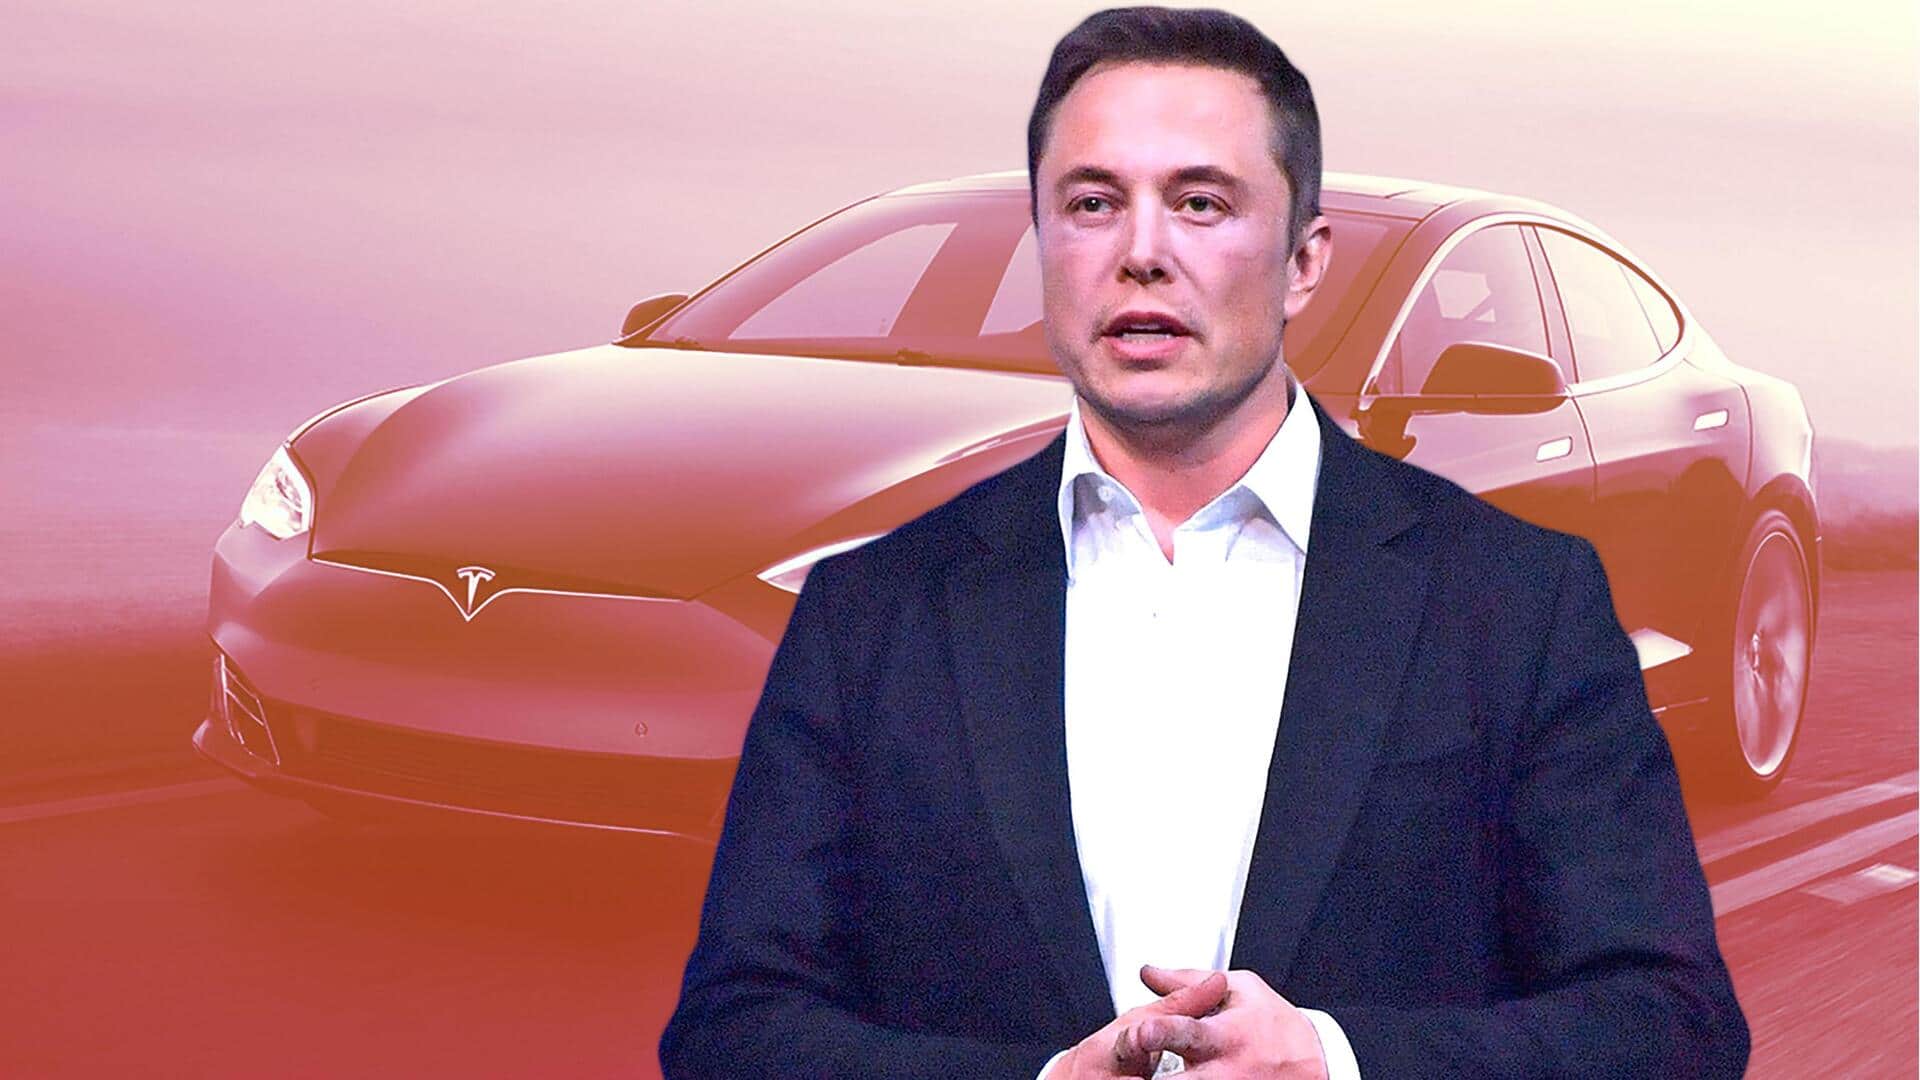 Tesla paid no income taxes while its executives received billions